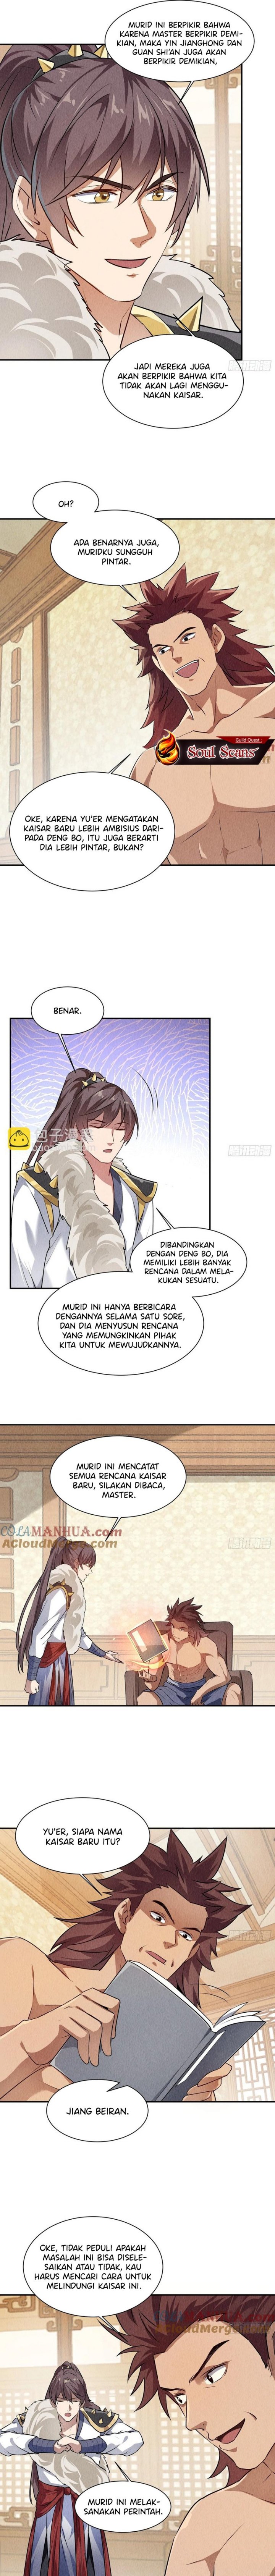 Dilarang COPAS - situs resmi www.mangacanblog.com - Komik i just dont play the card according to the routine 206 - chapter 206 207 Indonesia i just dont play the card according to the routine 206 - chapter 206 Terbaru 3|Baca Manga Komik Indonesia|Mangacan